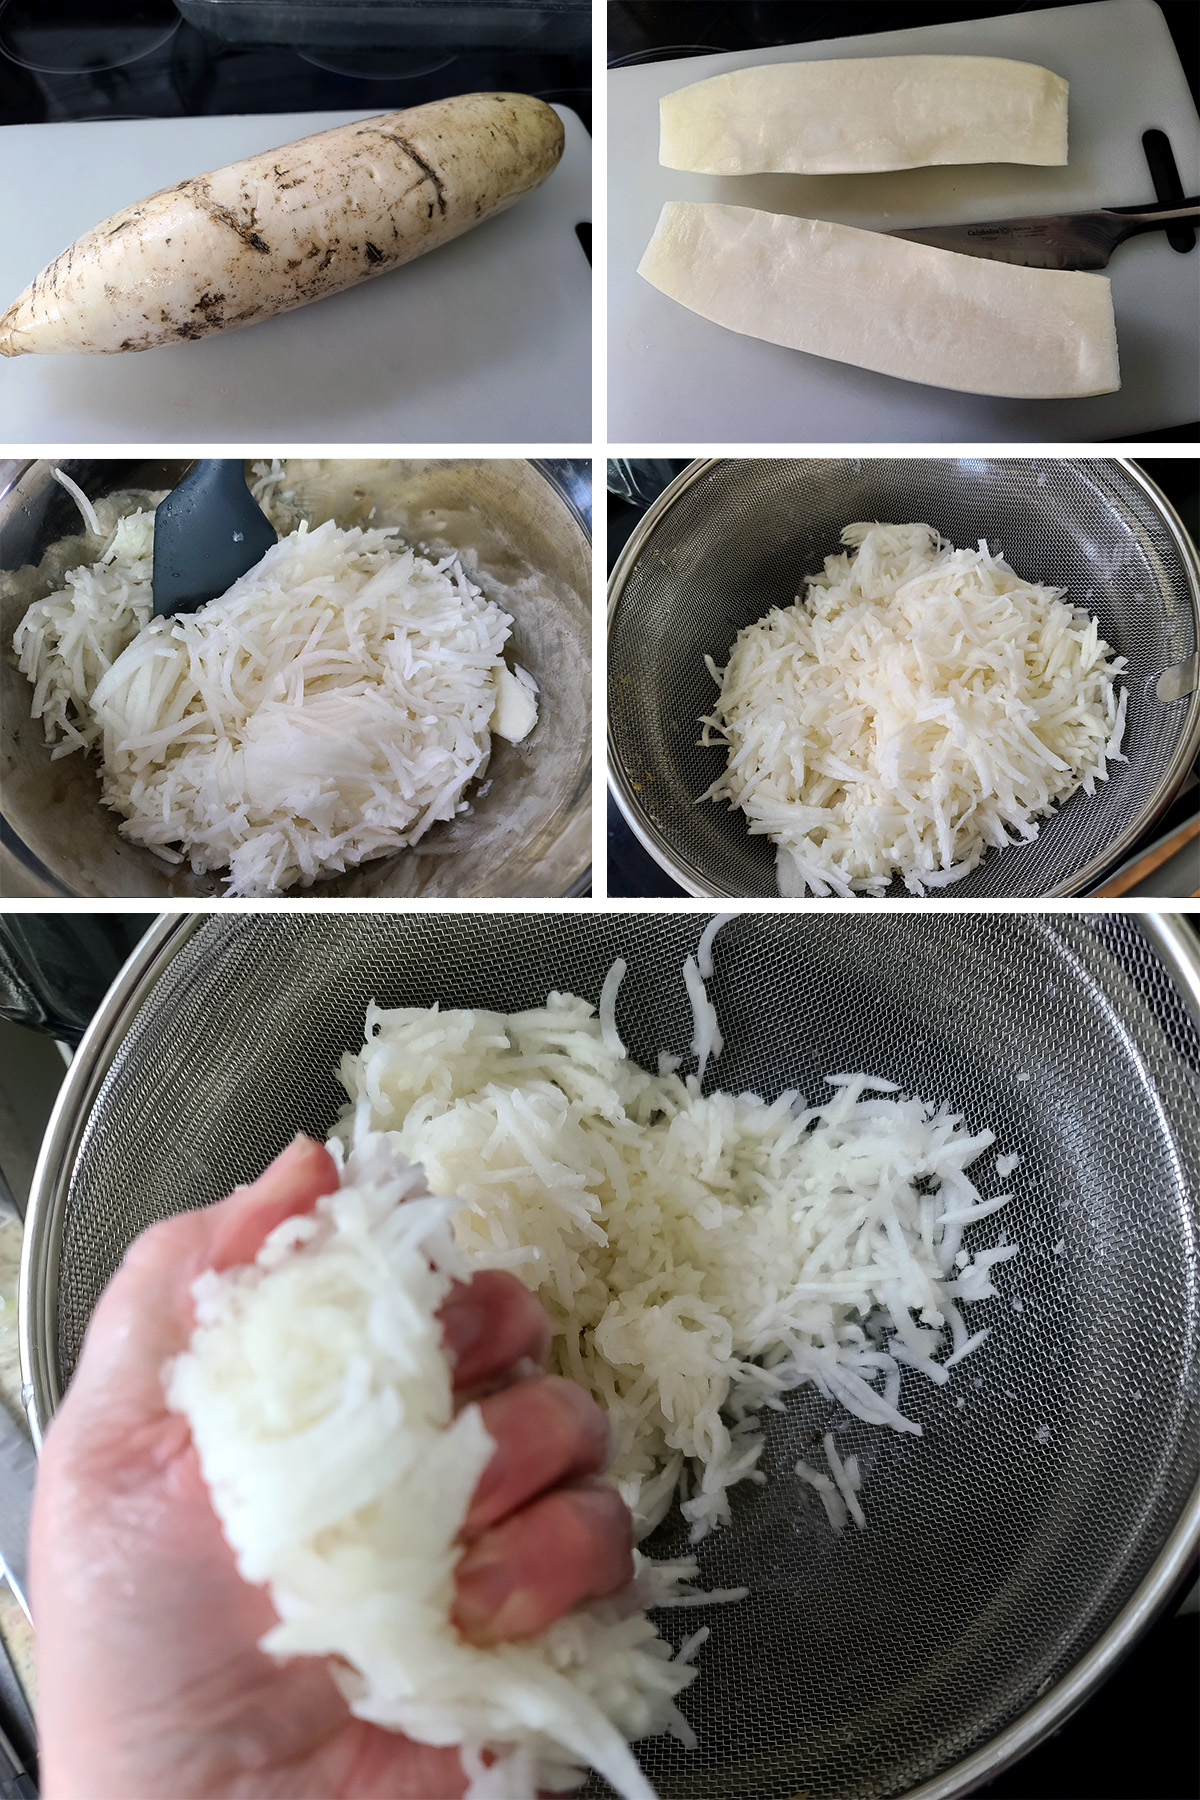 A 5 part image showing a dailon radish being shredded and squeezed, as described.